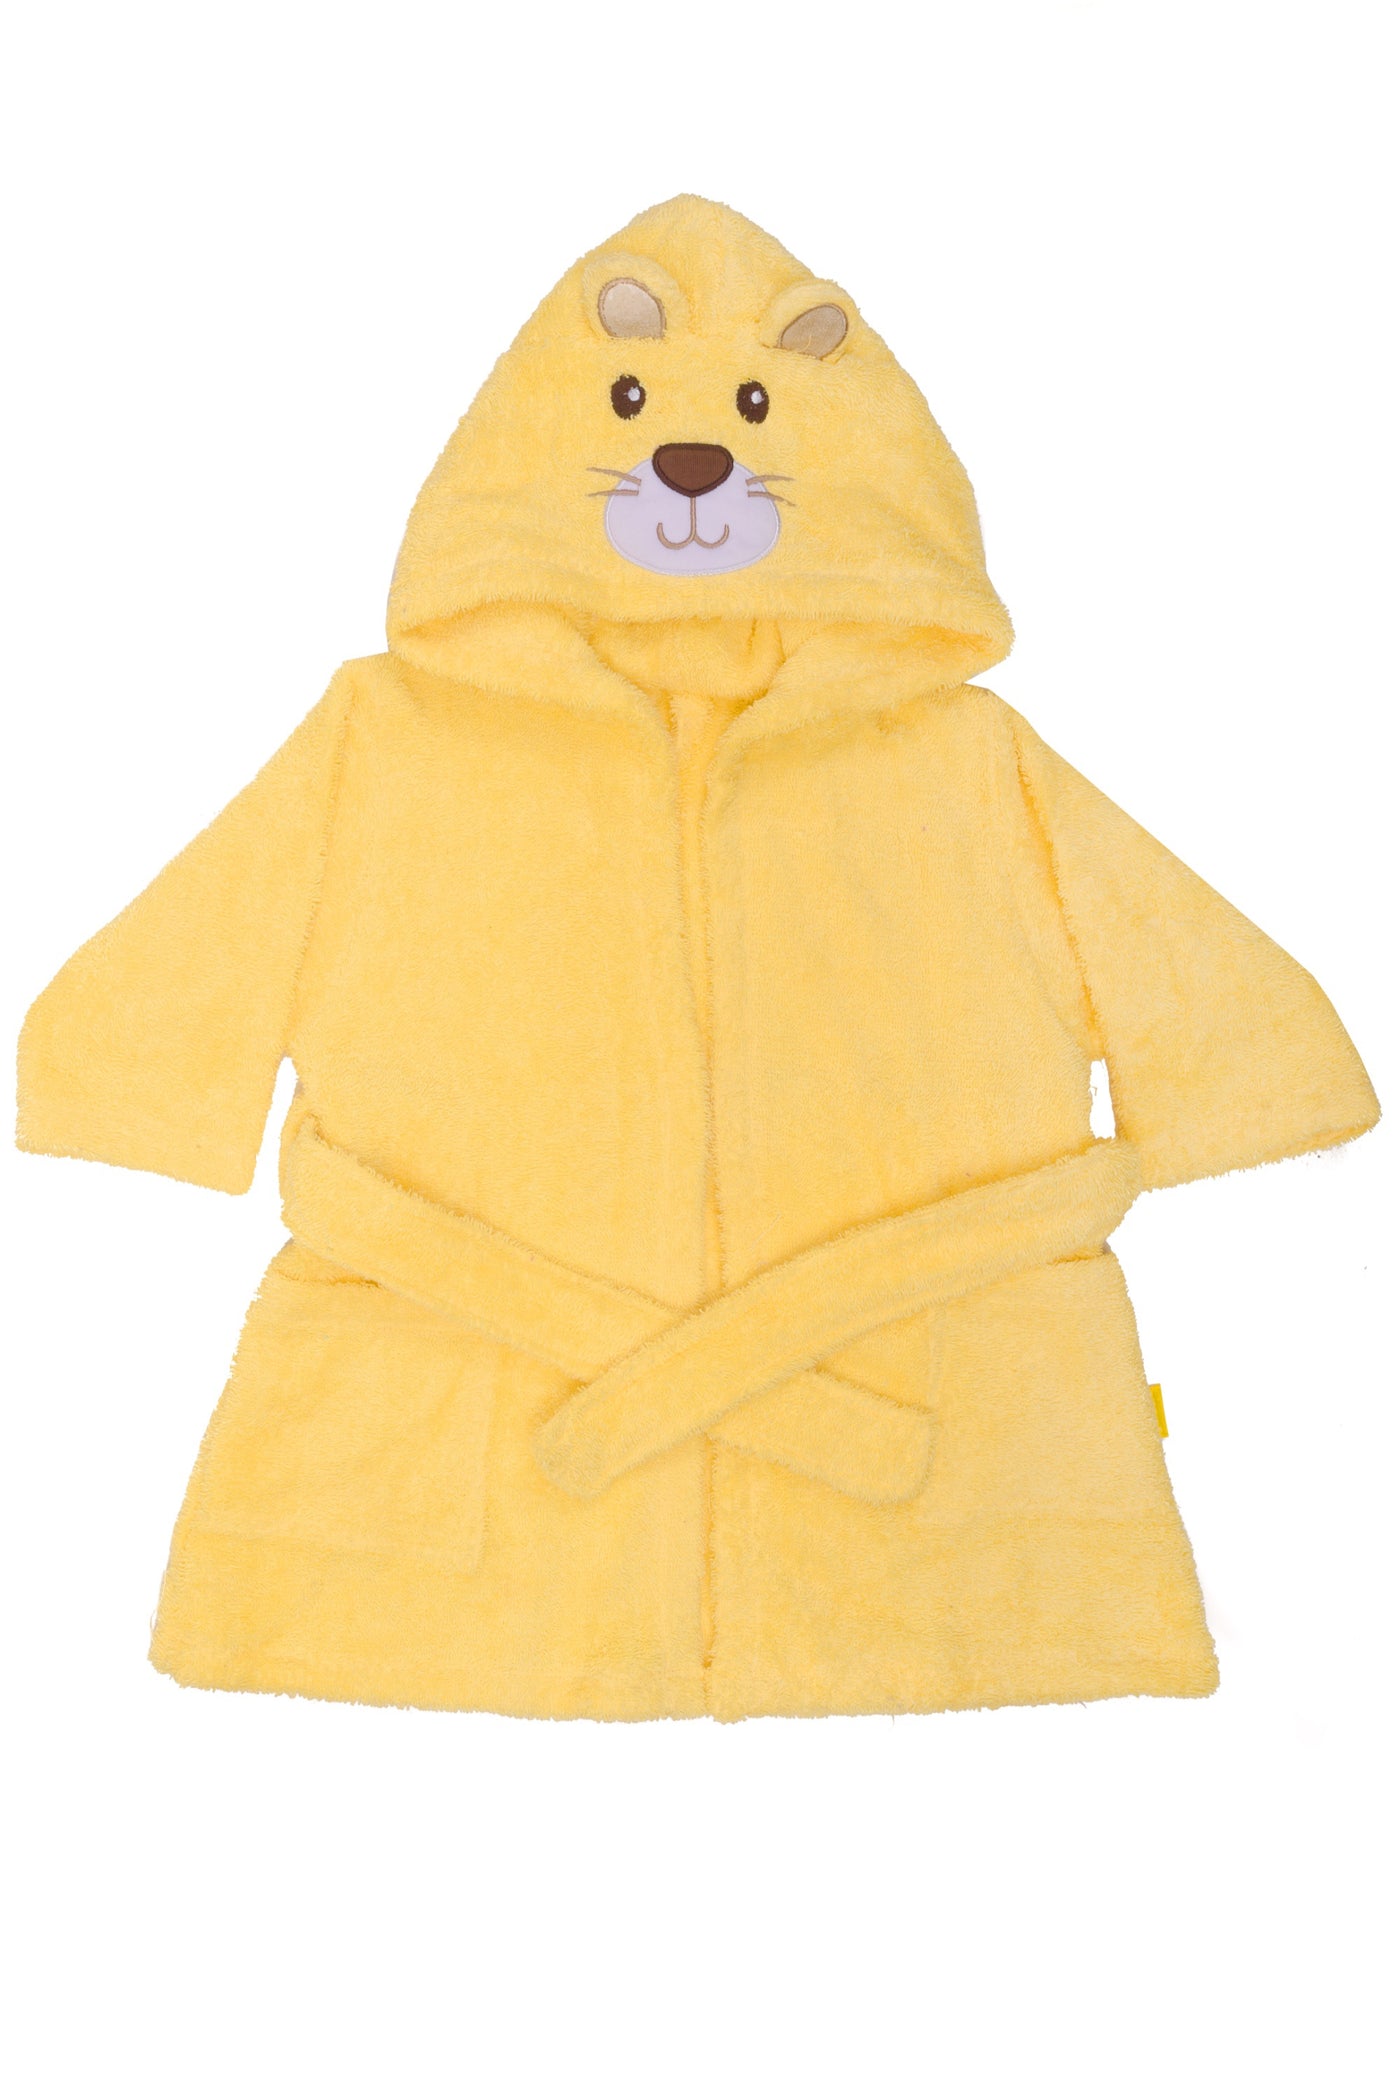 Embroidered Hooded Towel